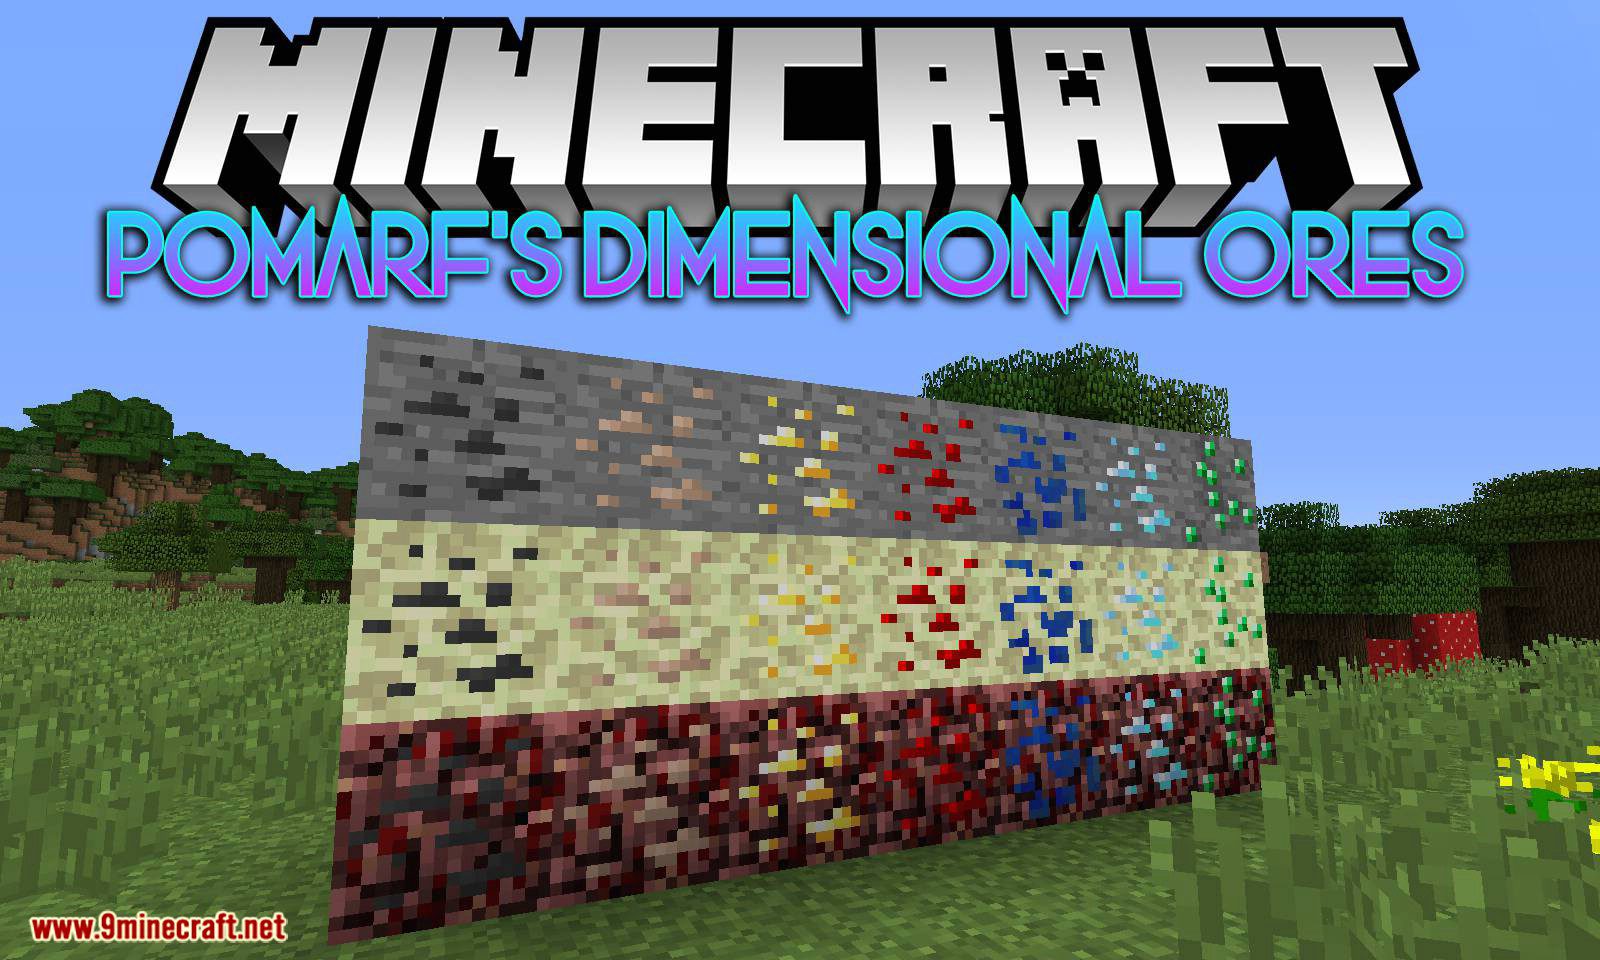 Pomarf’s Dimensional Ores Mod 1.12.2 download